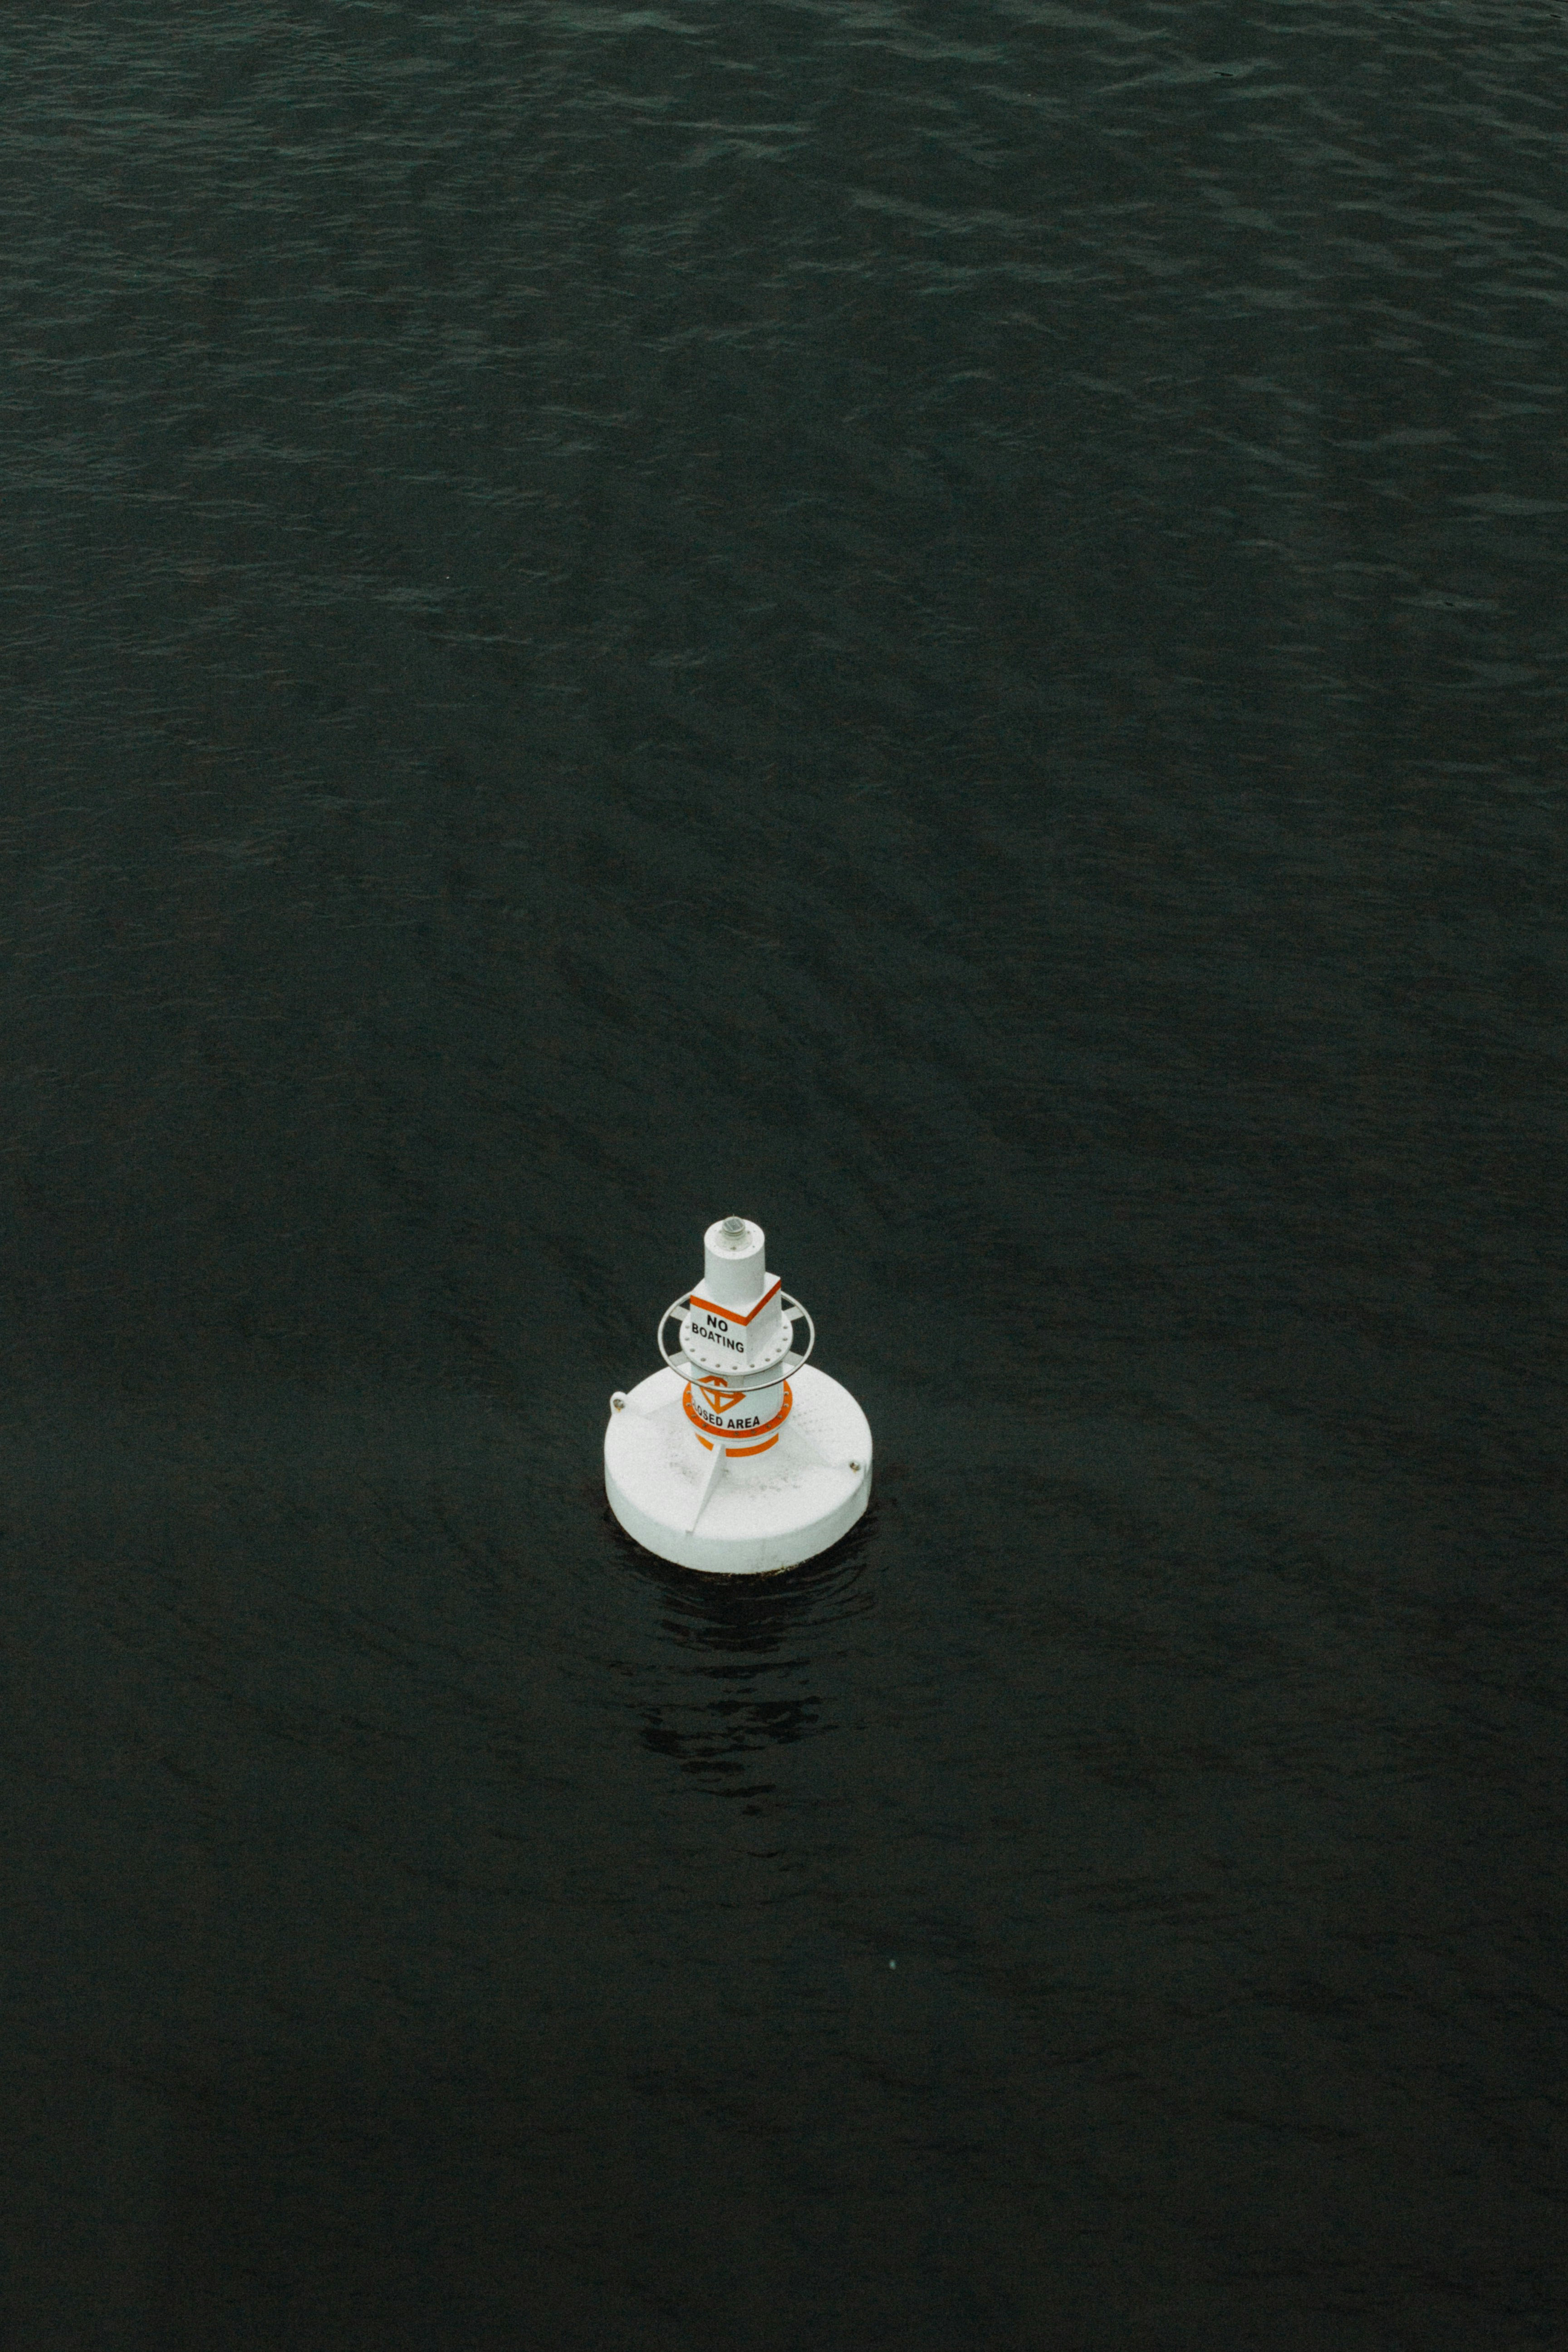 round white ornament on top of body of water floating